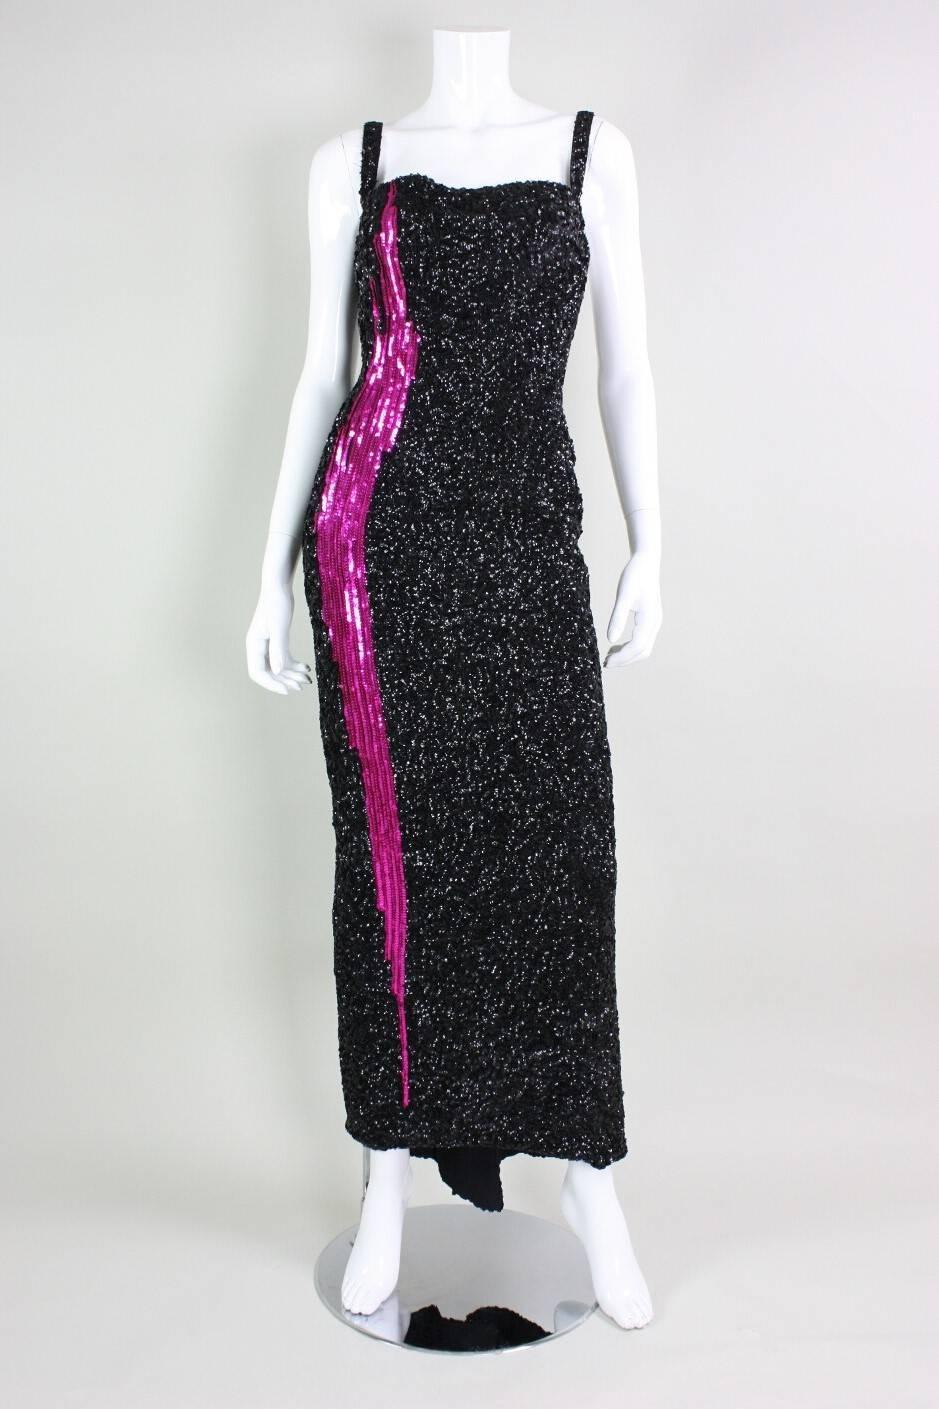 Vintage gown from Mr. Blackwell dates to the 1950's through early 1960's and is fully covered in black and fuchsia sequins.  Fitted throughout.  Squared bustline with narrow shoulder straps.  Center back zipper.  Fully lined.  Back vent in